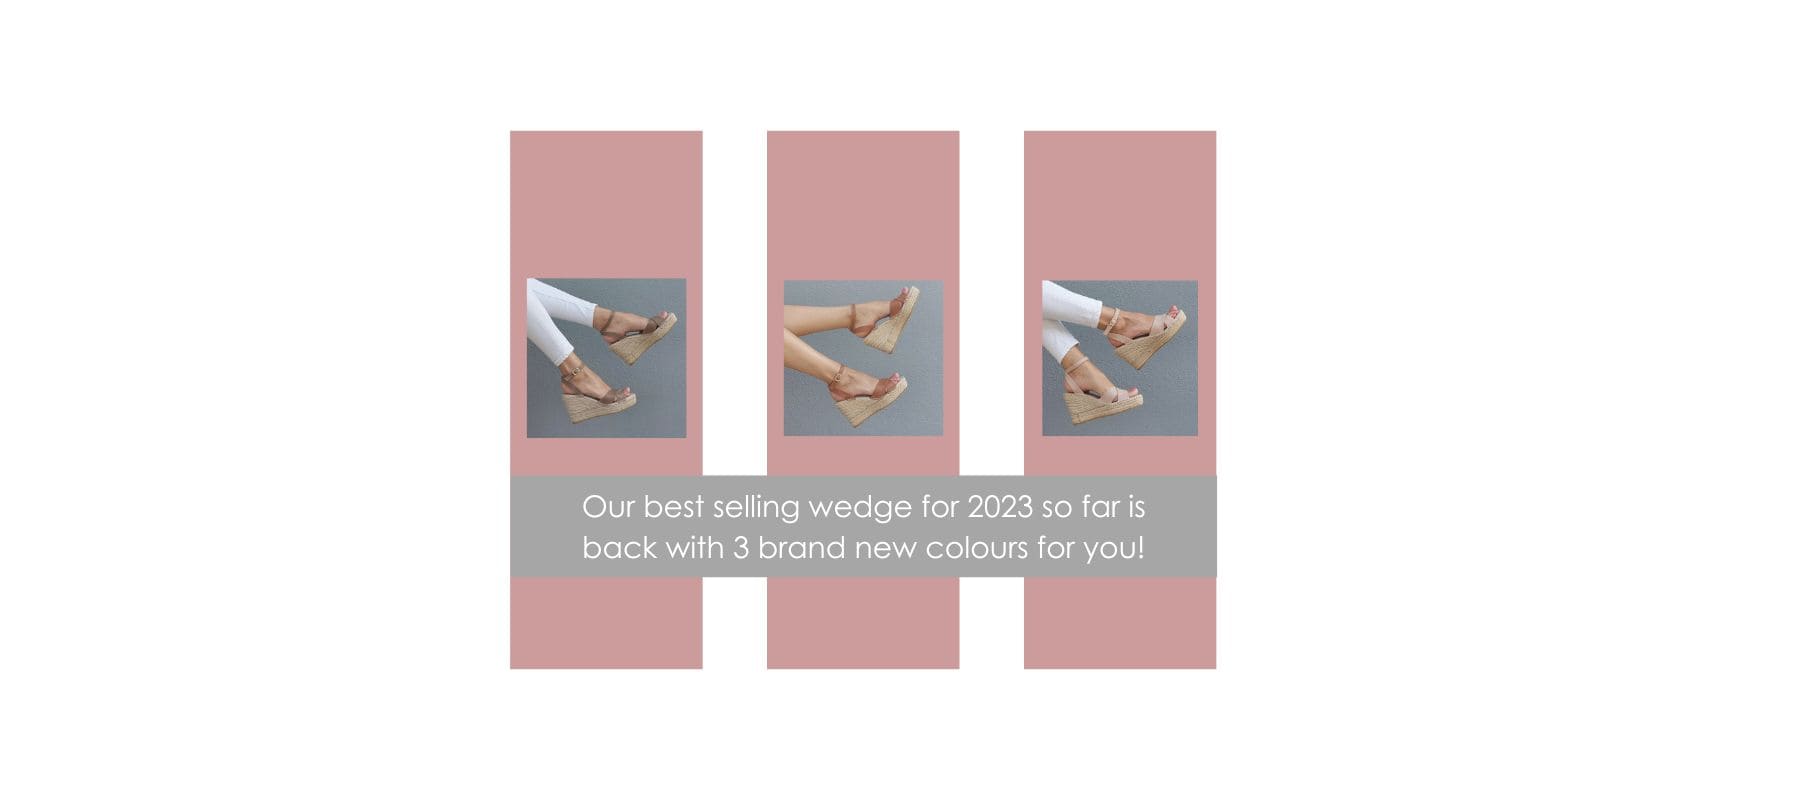 2023 Best Selling Wedge News: Experience Comfort and Quality - Shoeq